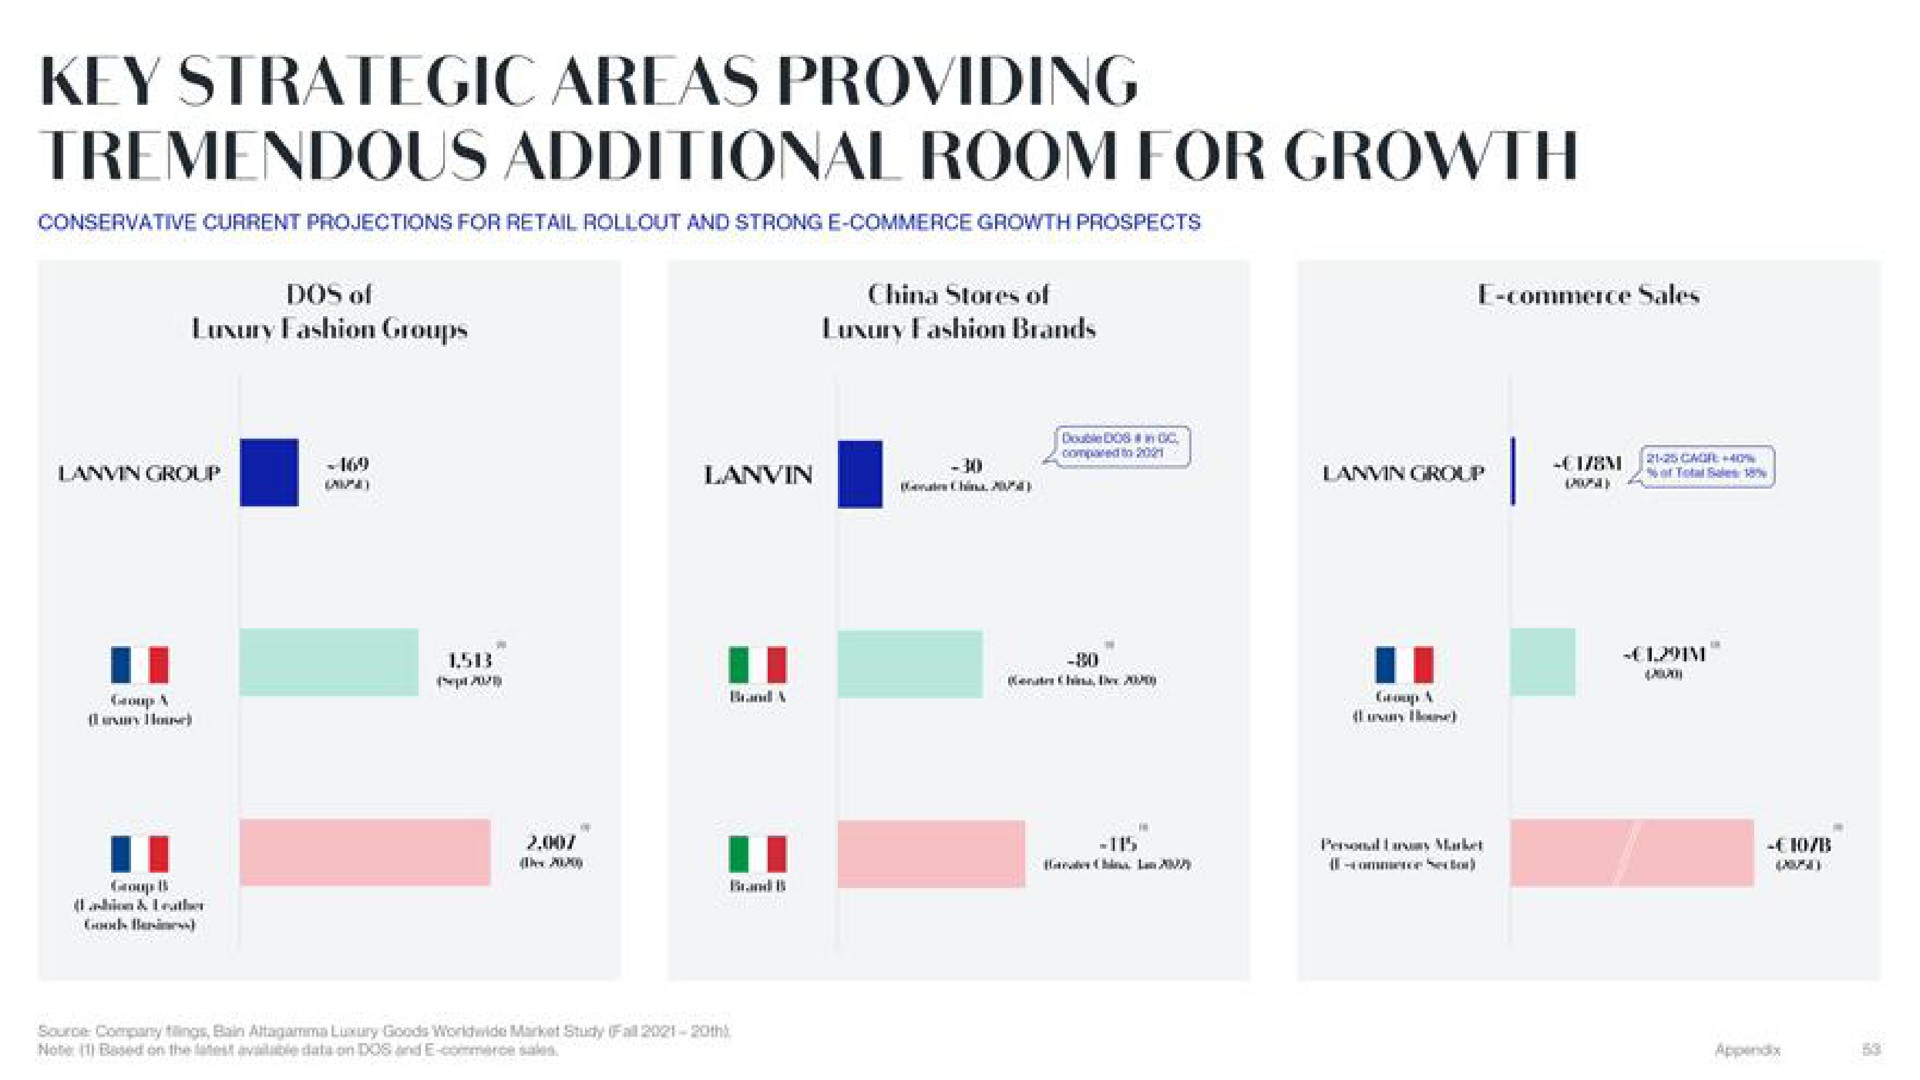 key areas providing tremendous additional room for growth | Lanvin